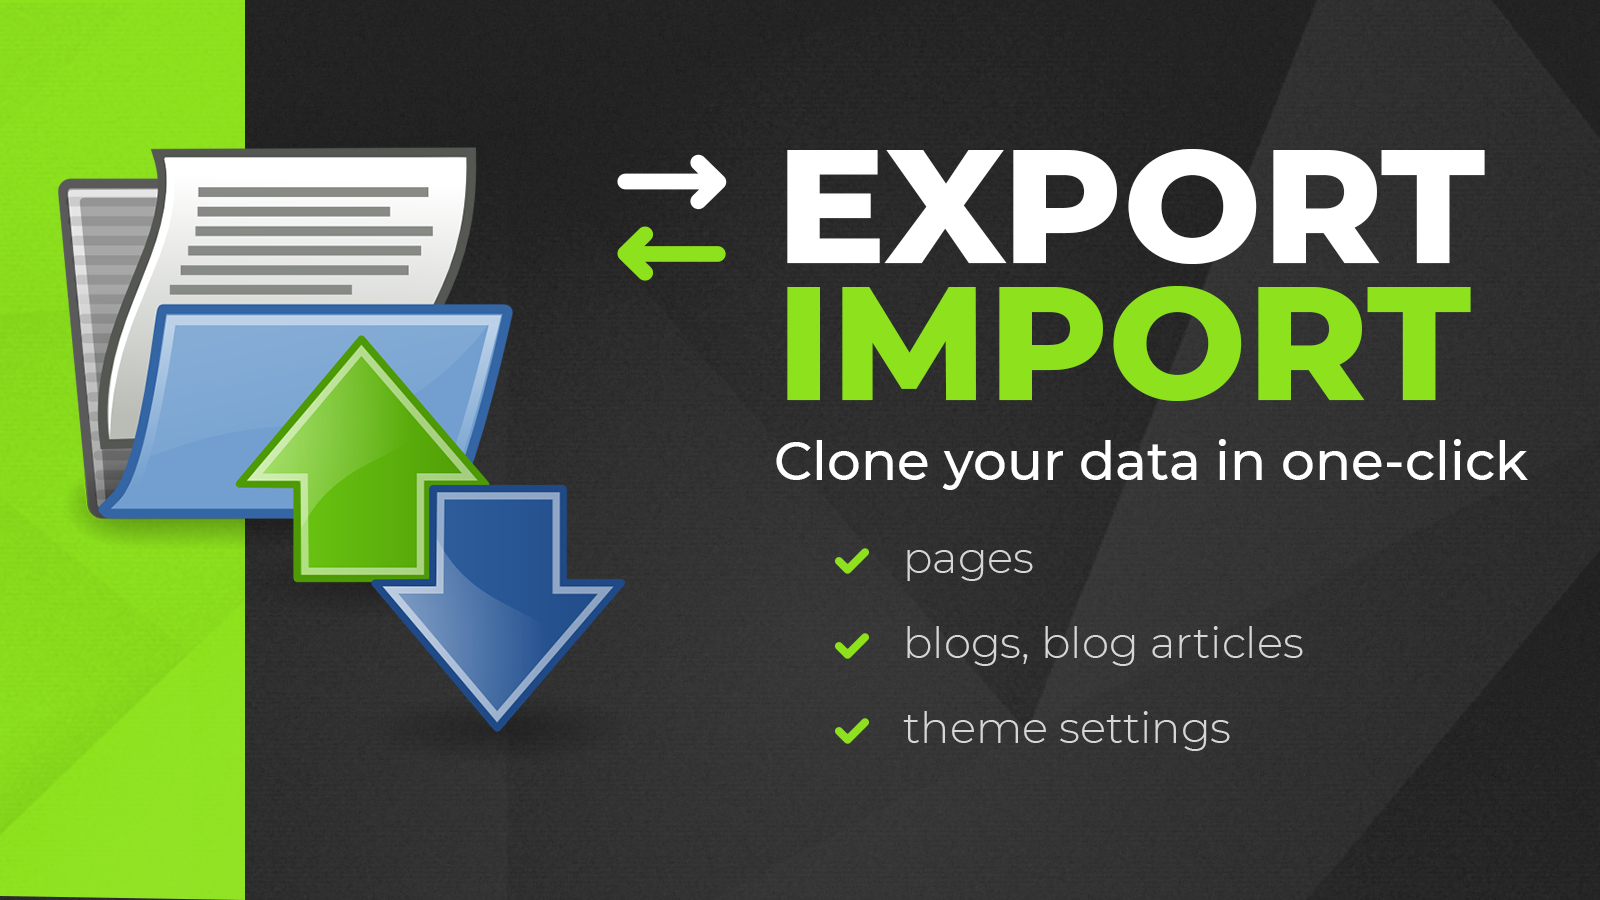 Clone your data in one click